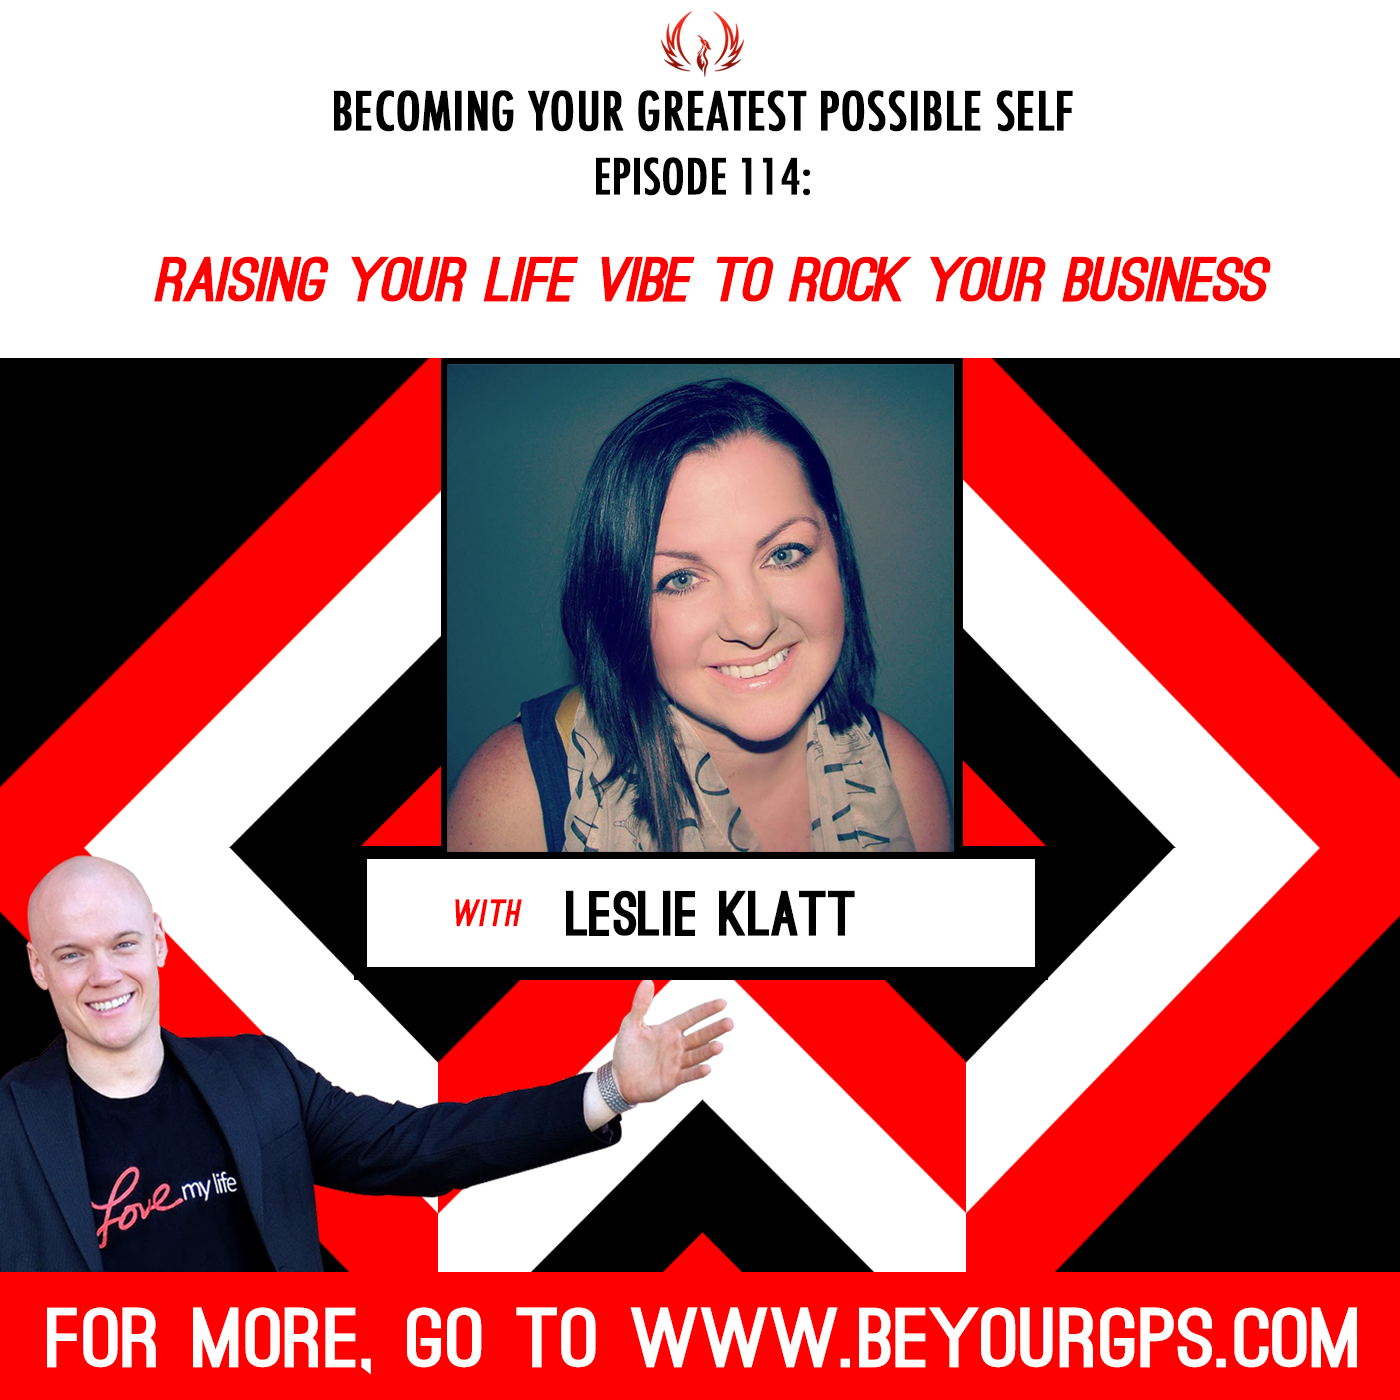 Raising Your Life Vibe to Rock Your Business with Leslie Klatt